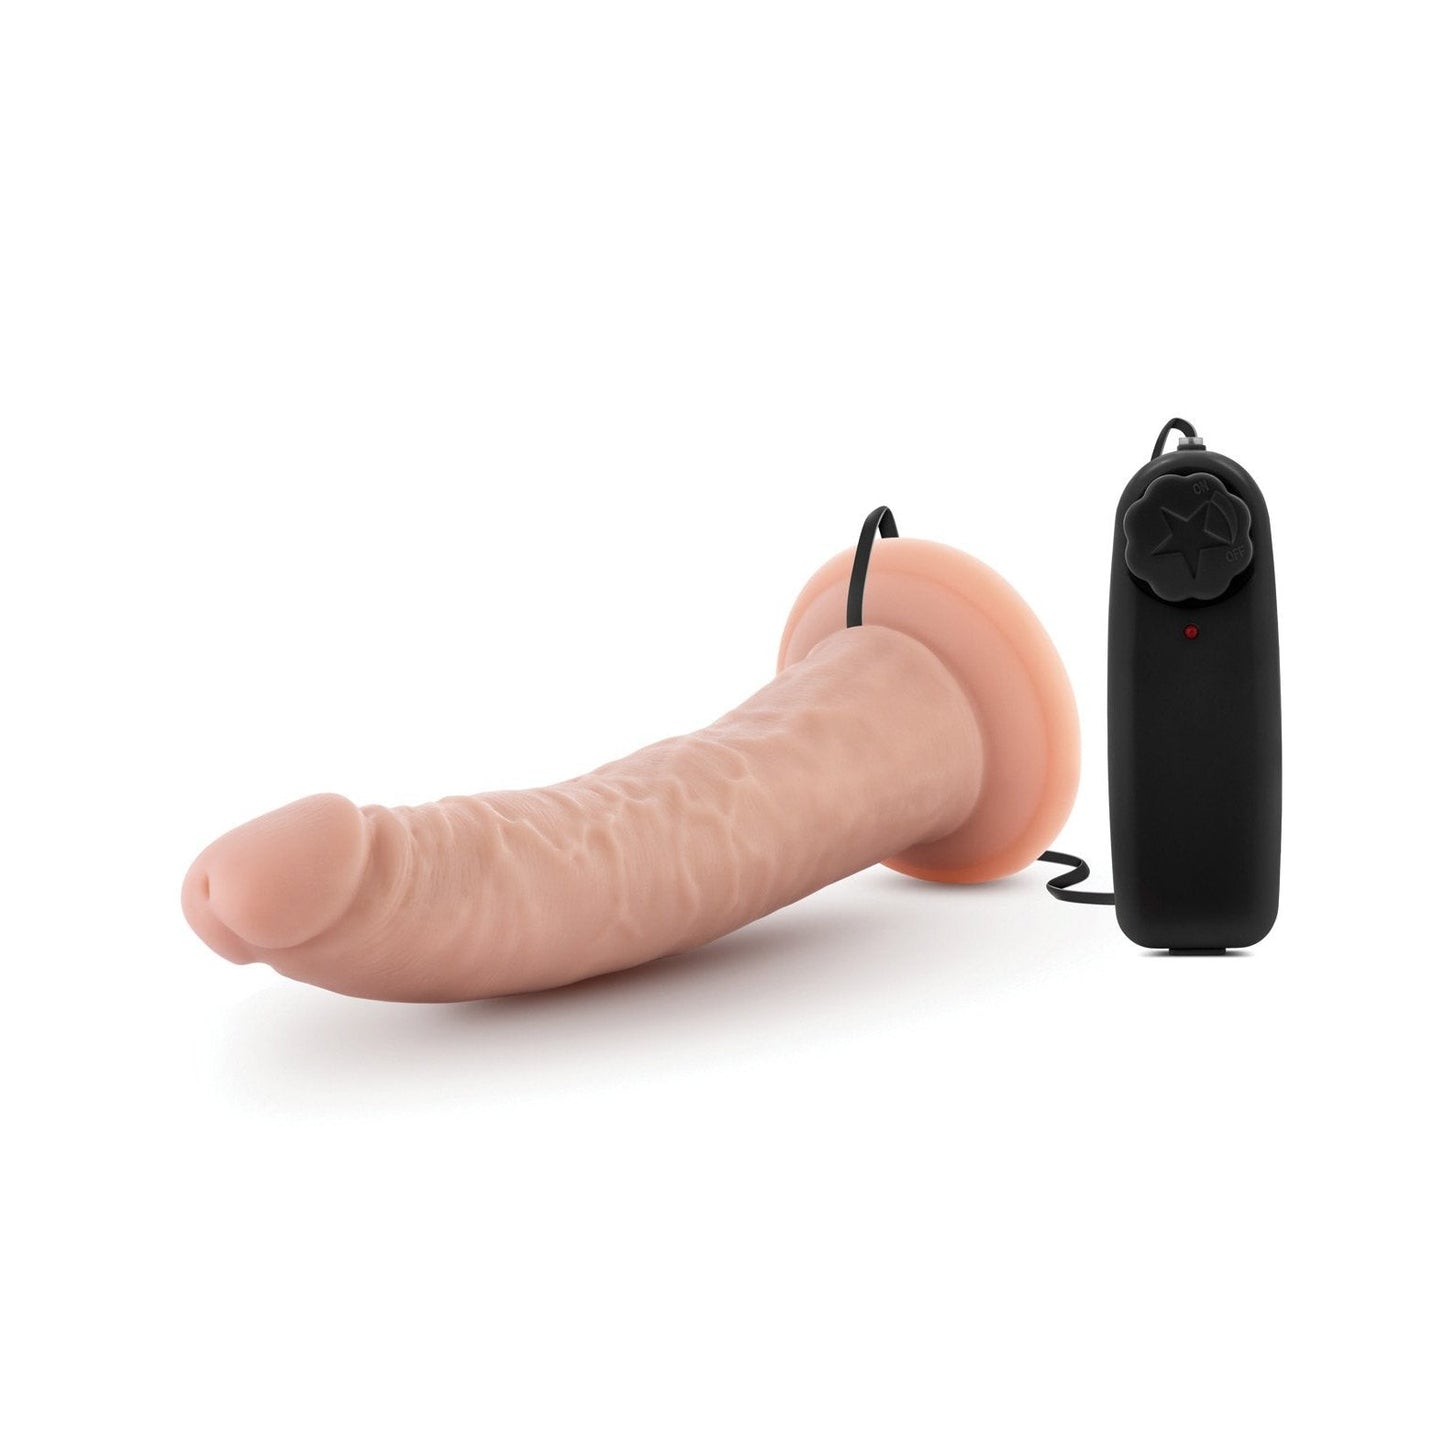 Blush Dr. Skin Dr. Dave 7" Cock w/Suction Cup